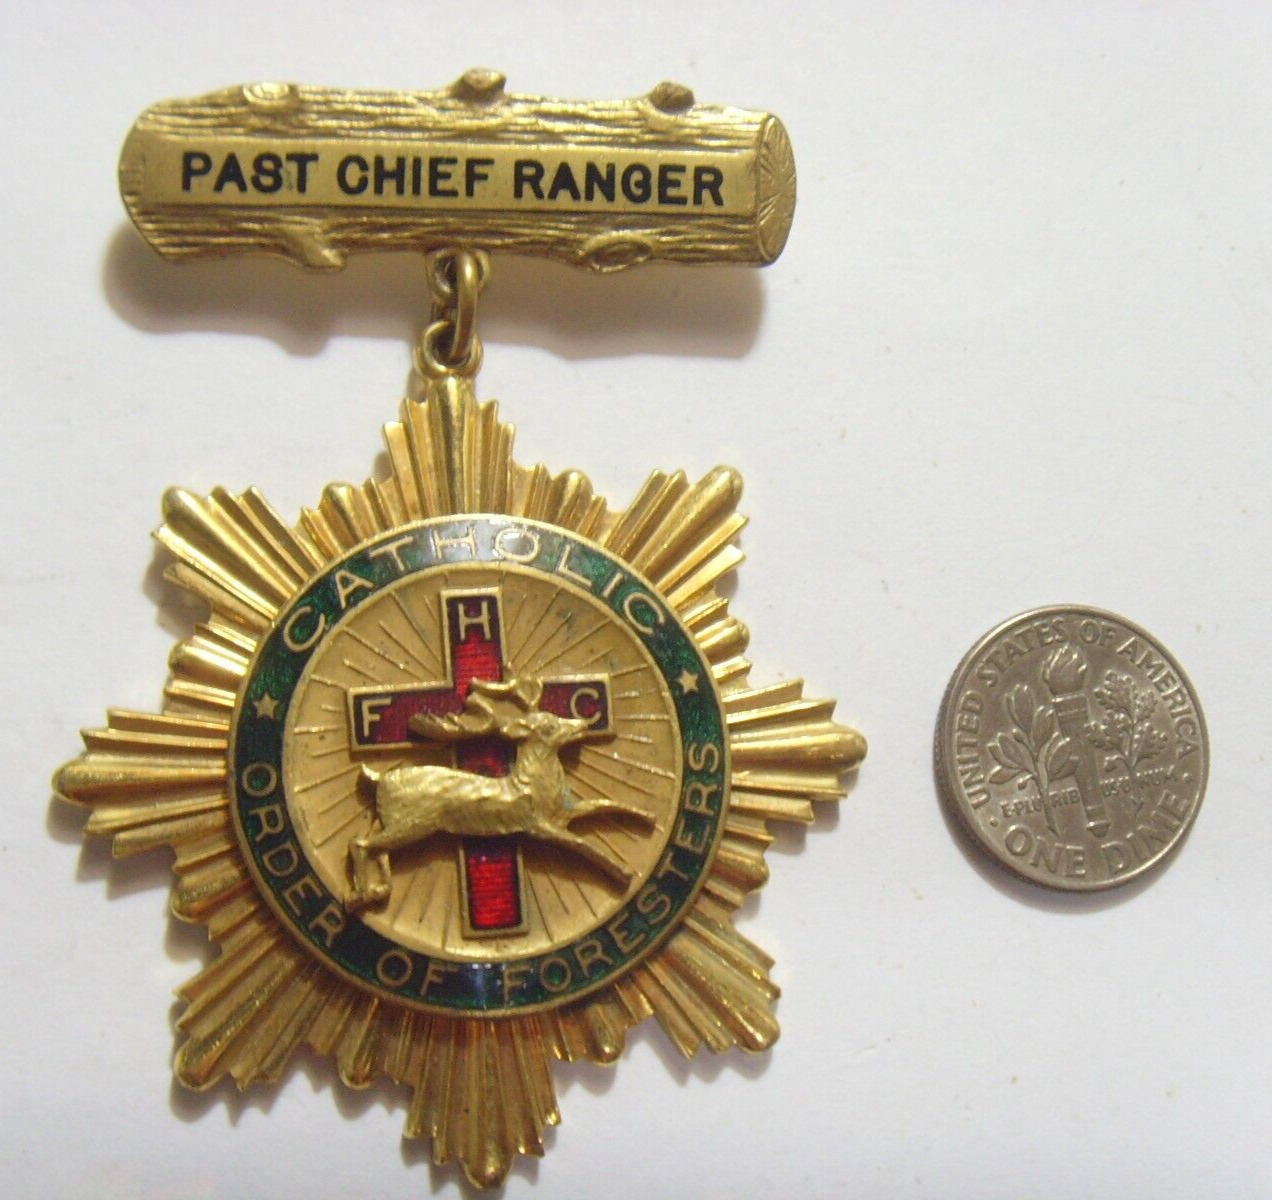 1920s Antique Catholic order of Foresters past Chief Ranger Large medal FC1150